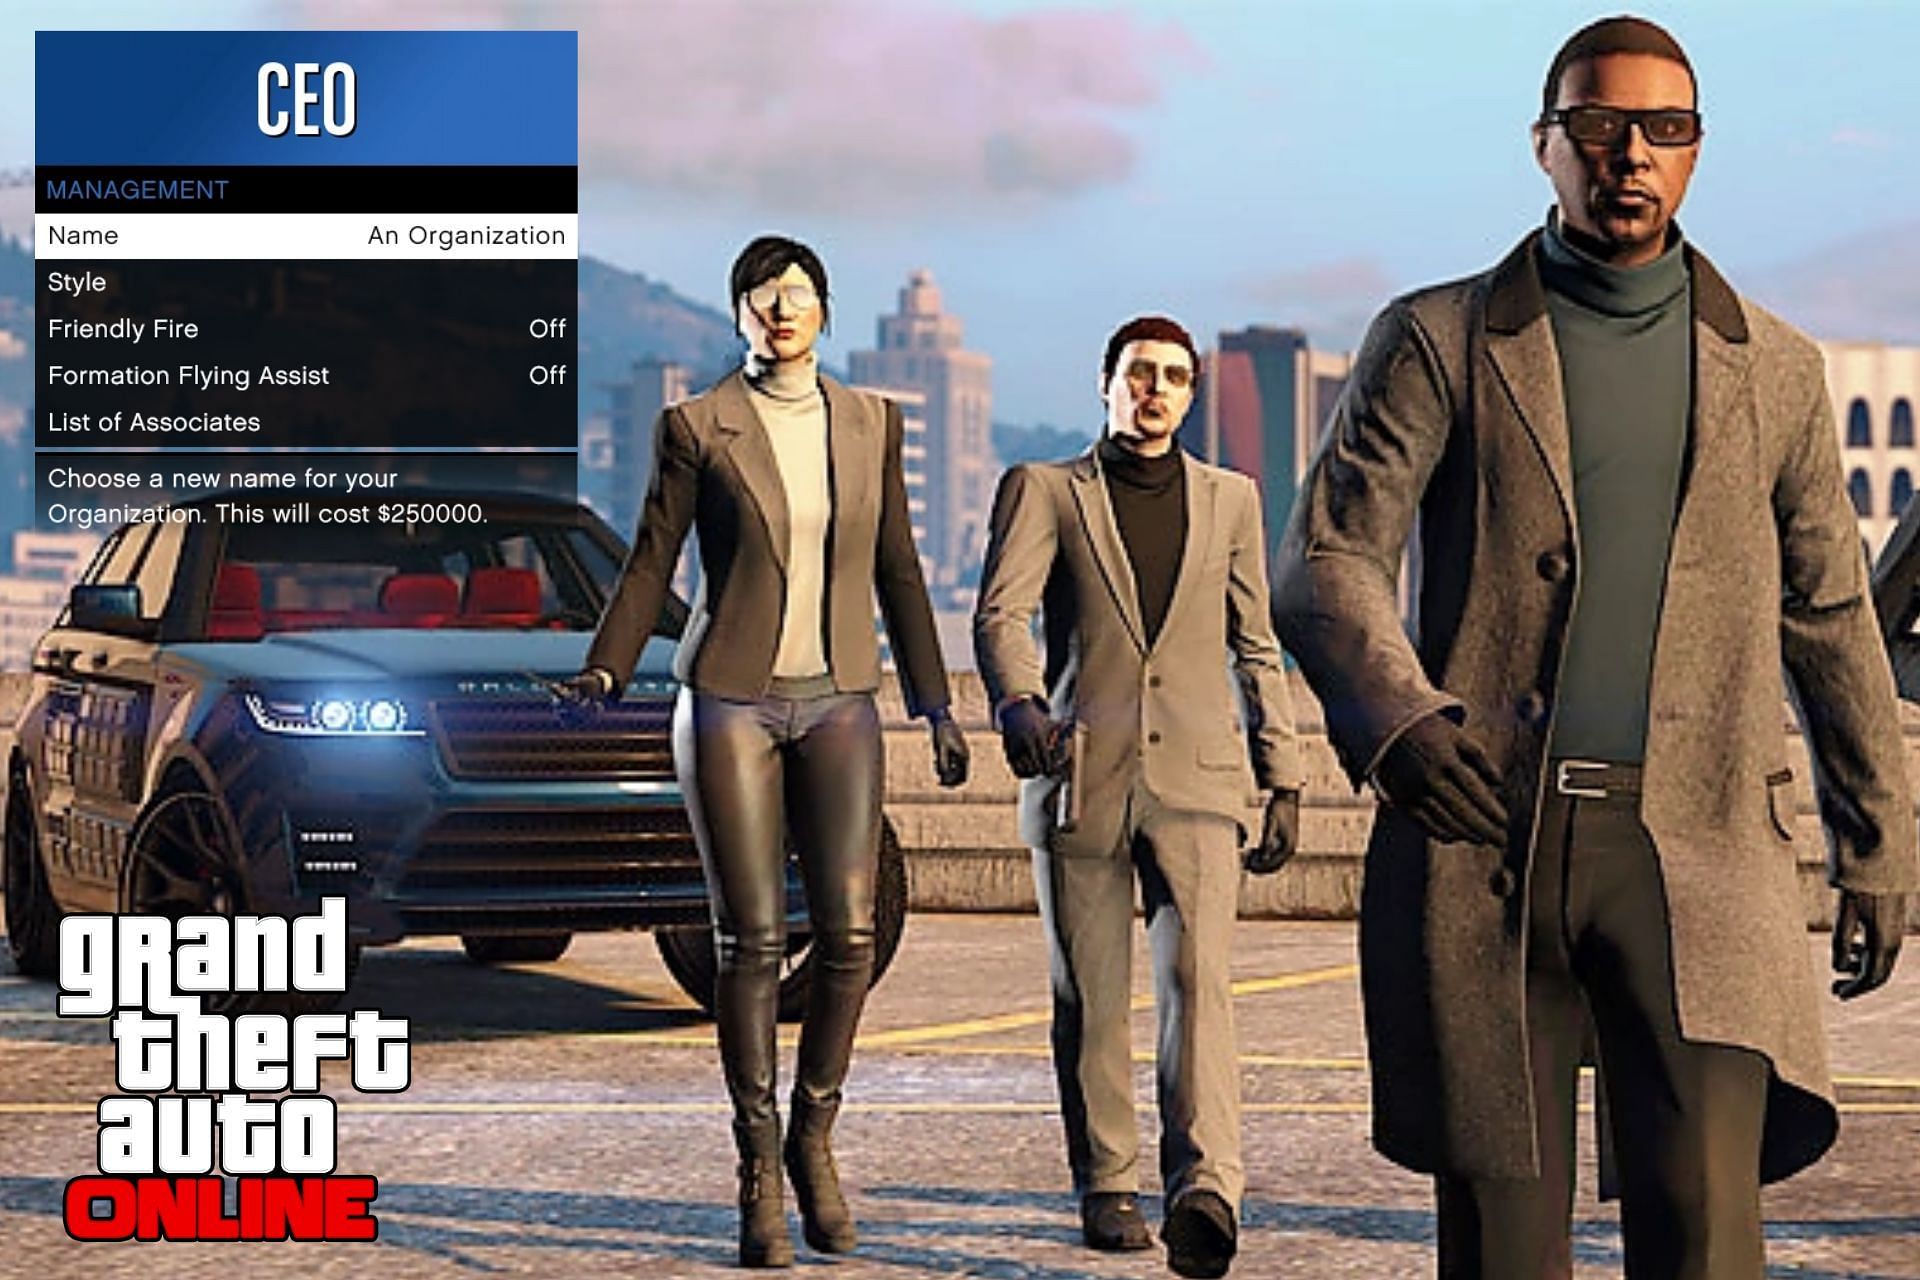 GTA Online allows players to change the name of their Organization multiple times (Image via Sportskeeda)